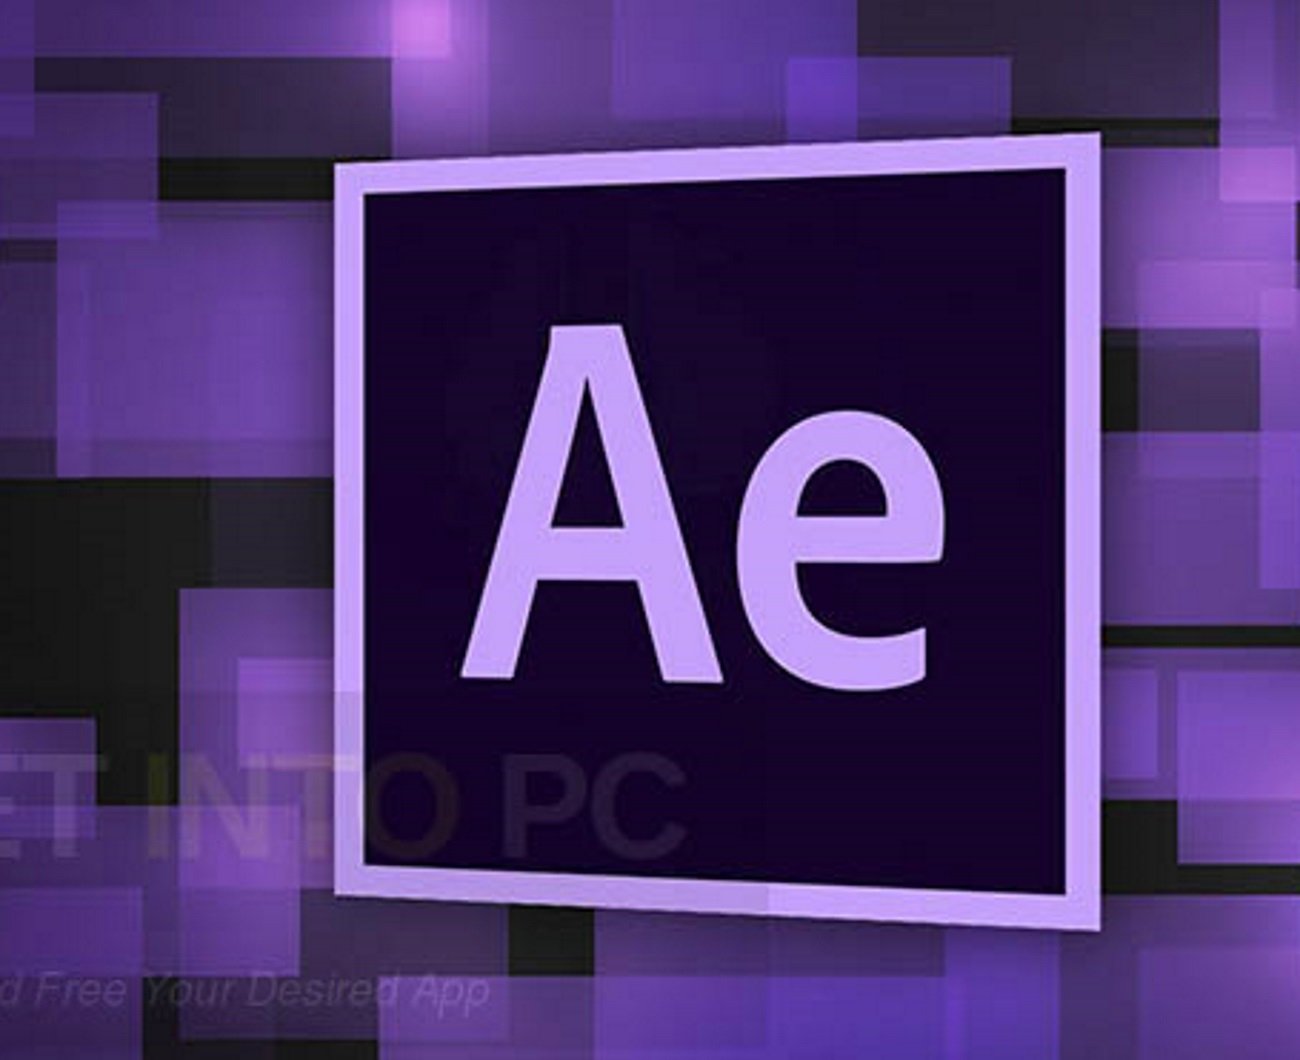 After effects packs. Афтер эффект. Adobe after. Логотип Афтер эффект. Adobe after Effects картинки.